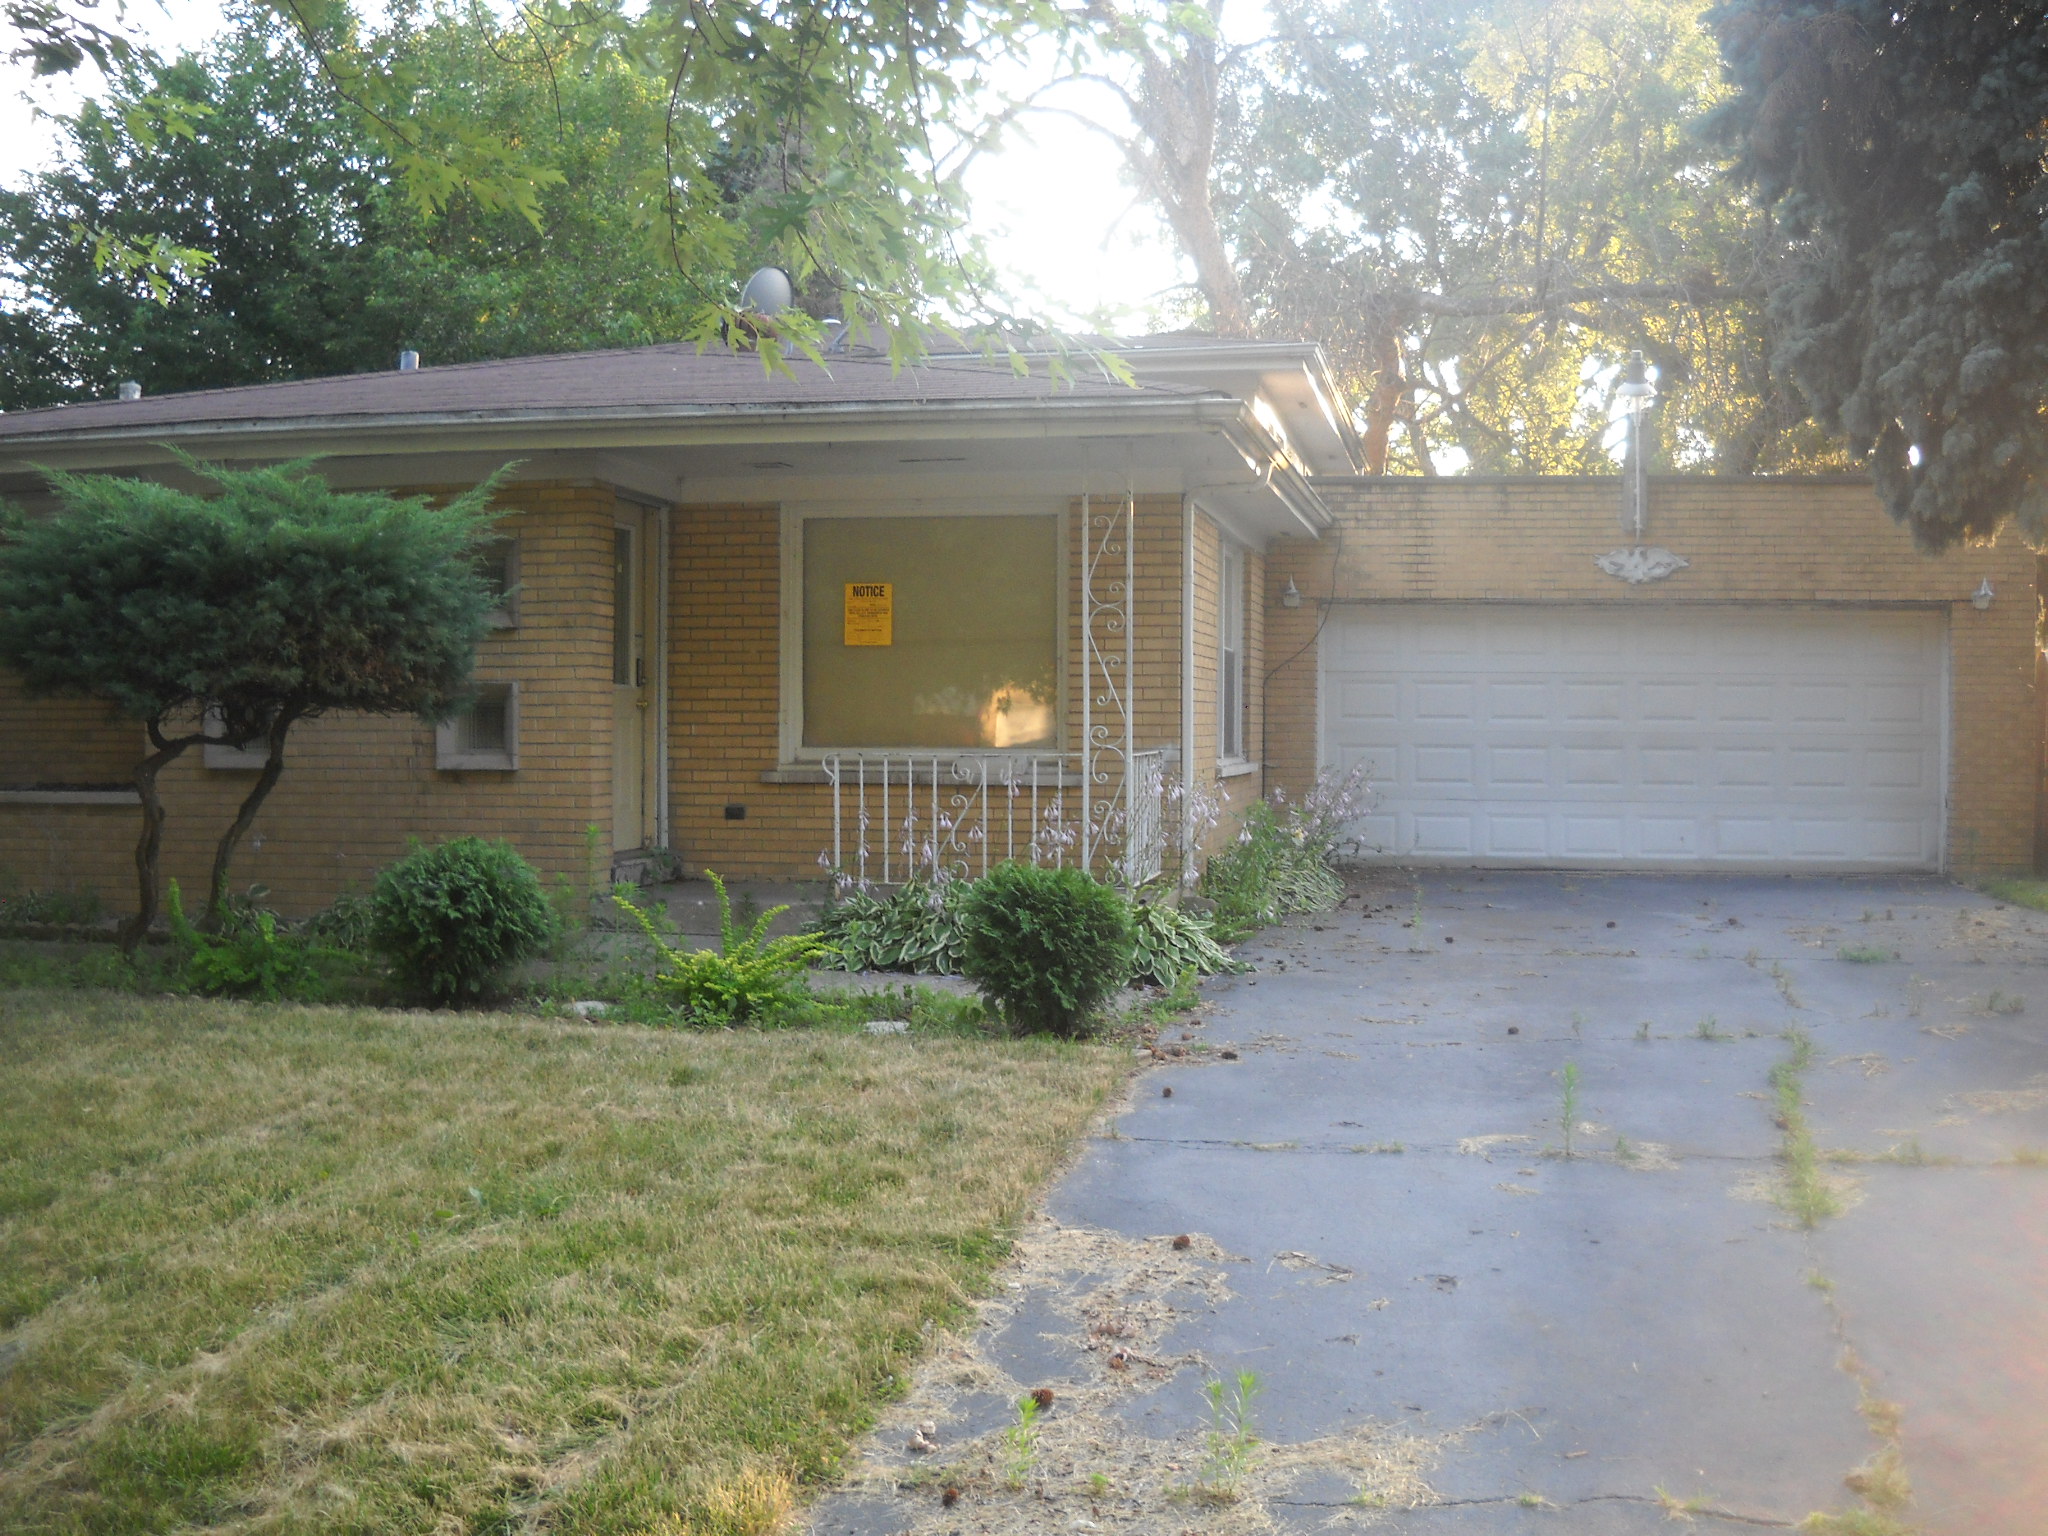  370 Patricia Drive, Chicago Heights, IL photo